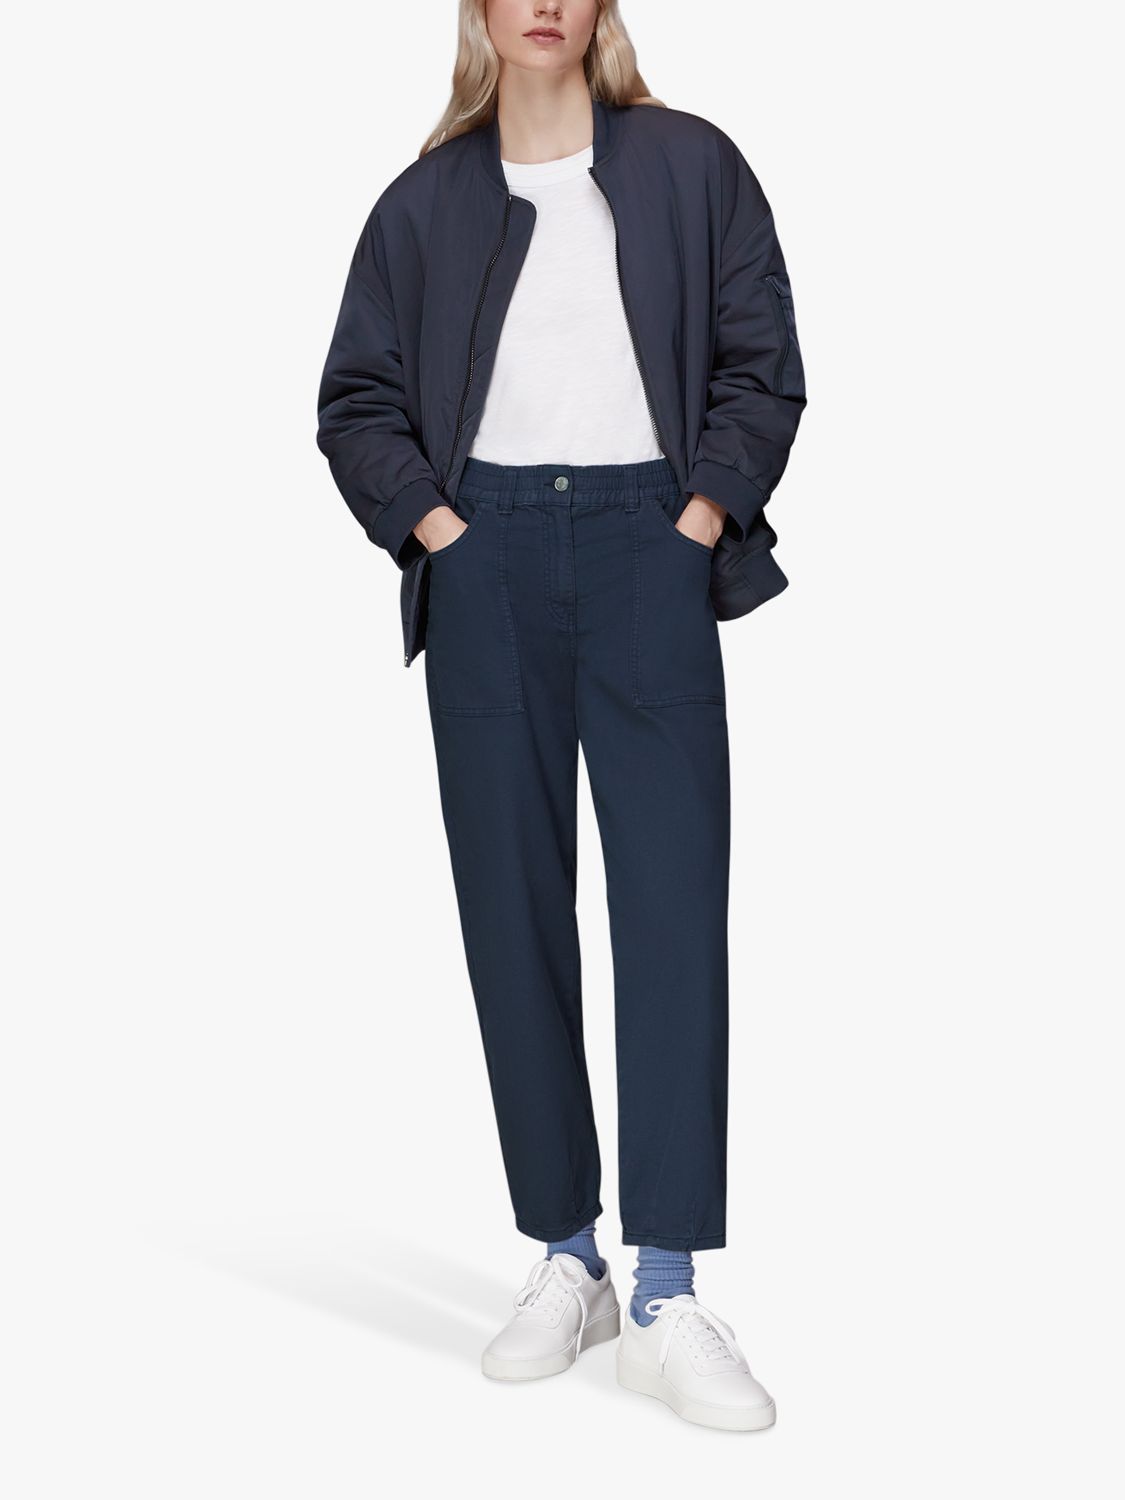 Whistles Tessa Casual Trousers, Navy